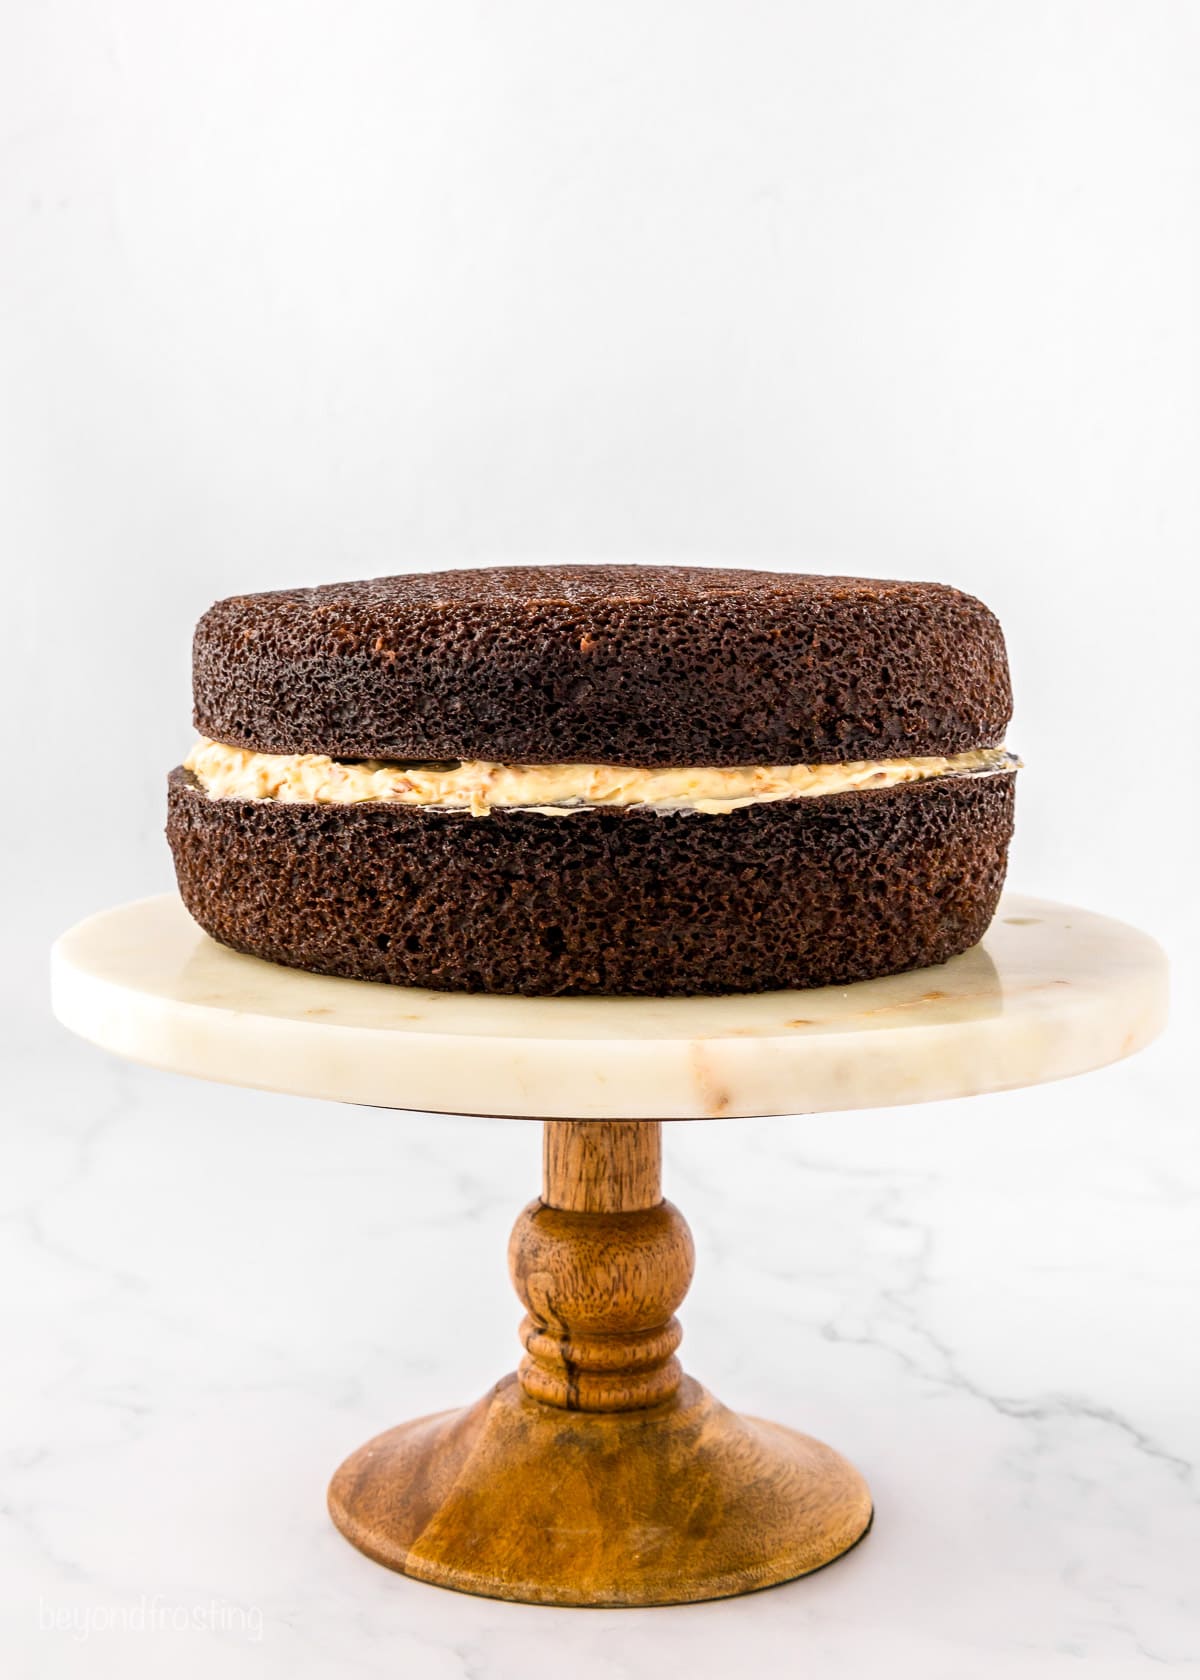 Two chocolate cake layers stacked and filled with caramel cream cheese frosting on a cake stand with a wooden base.